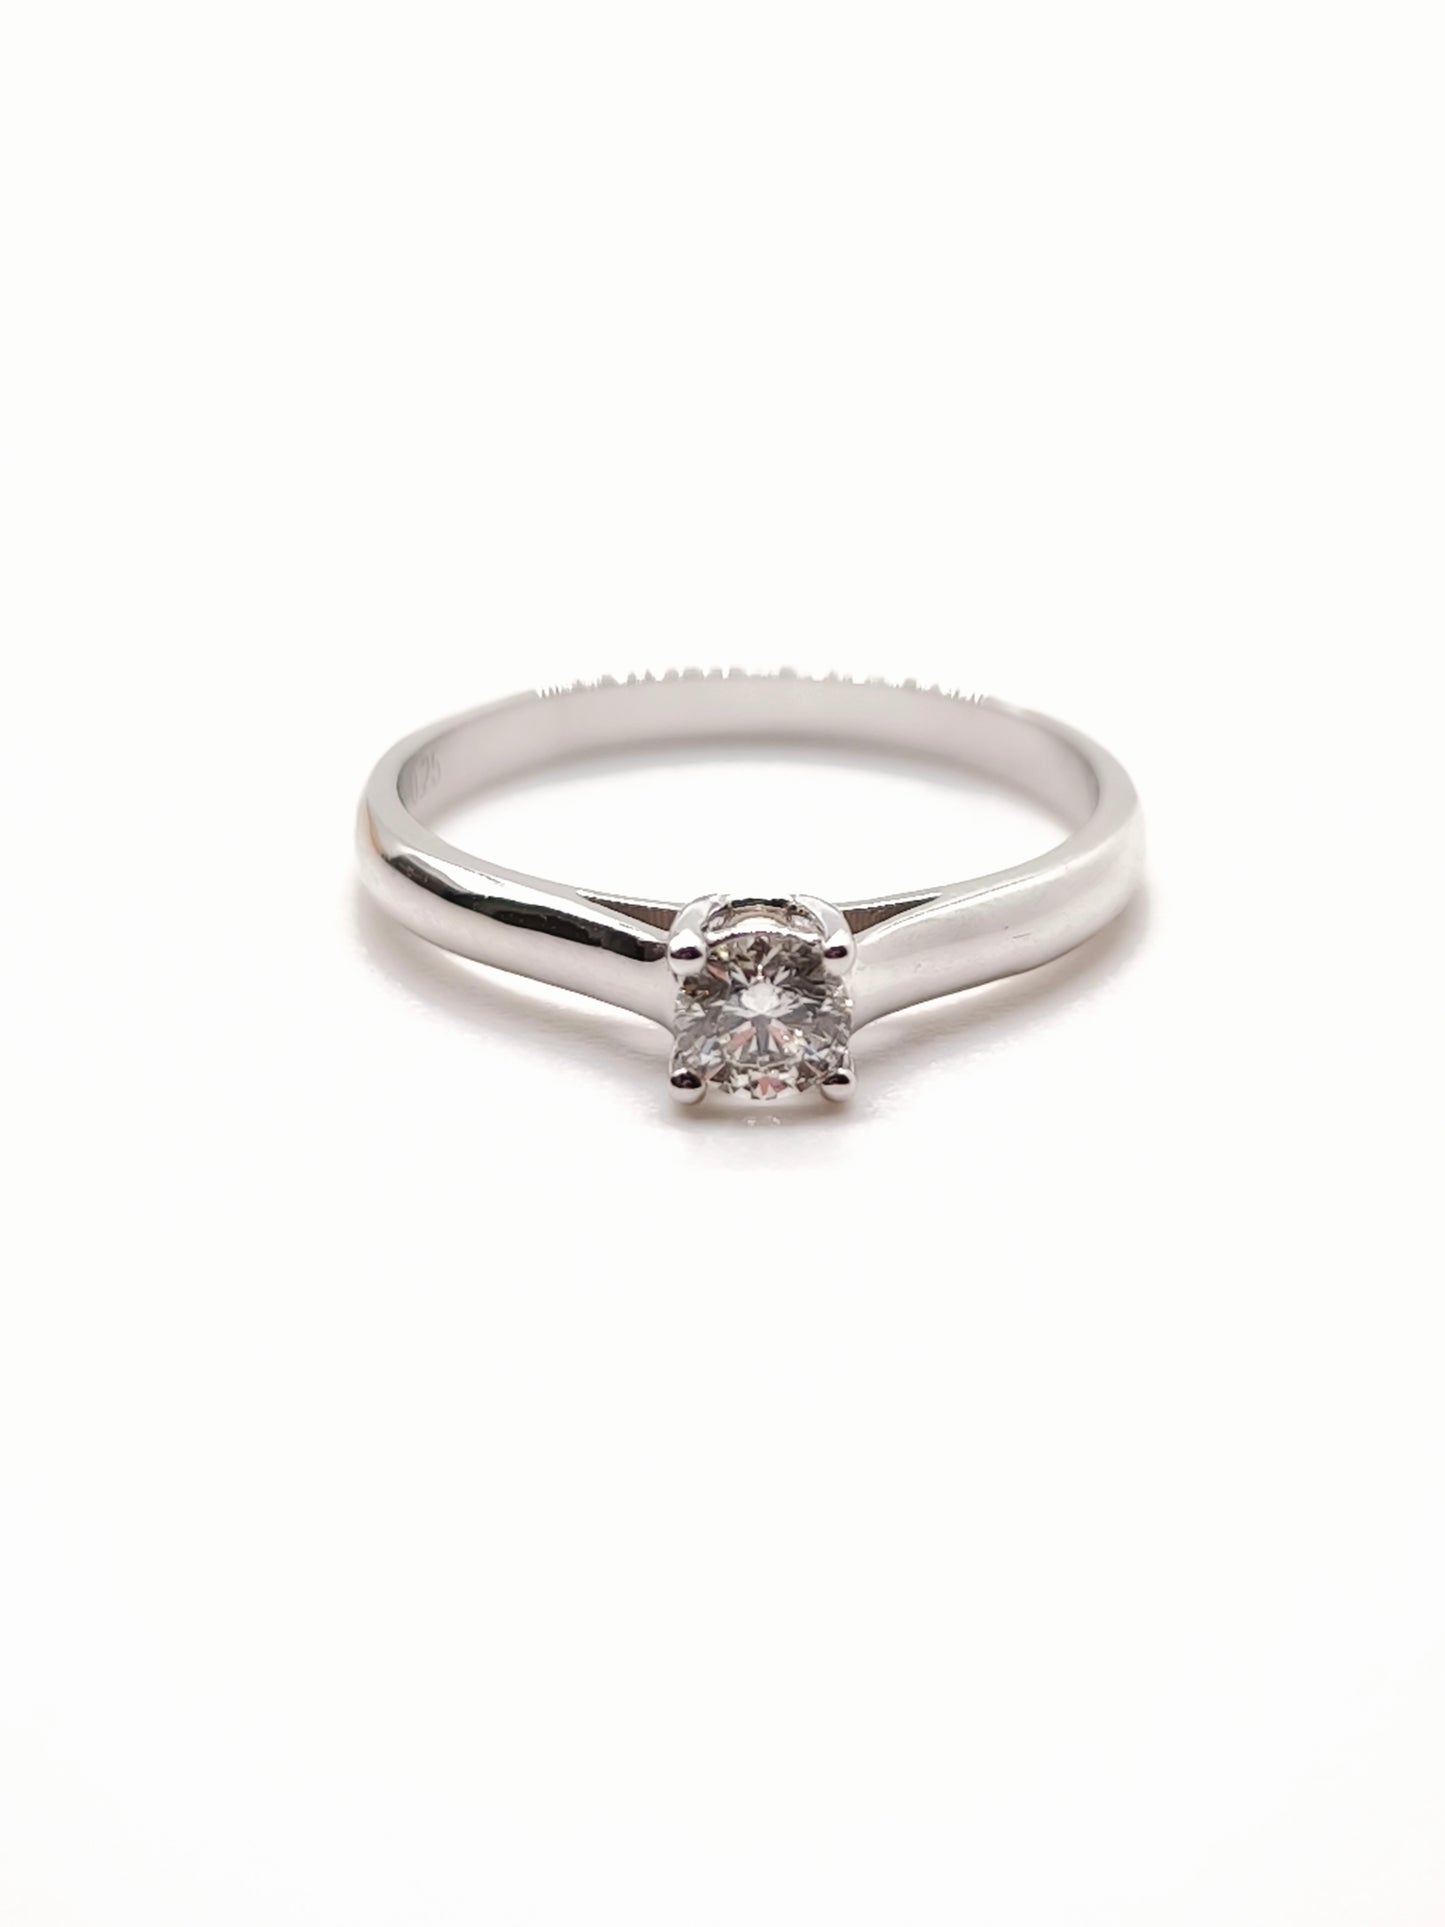 Gold solitaire ring with diamond